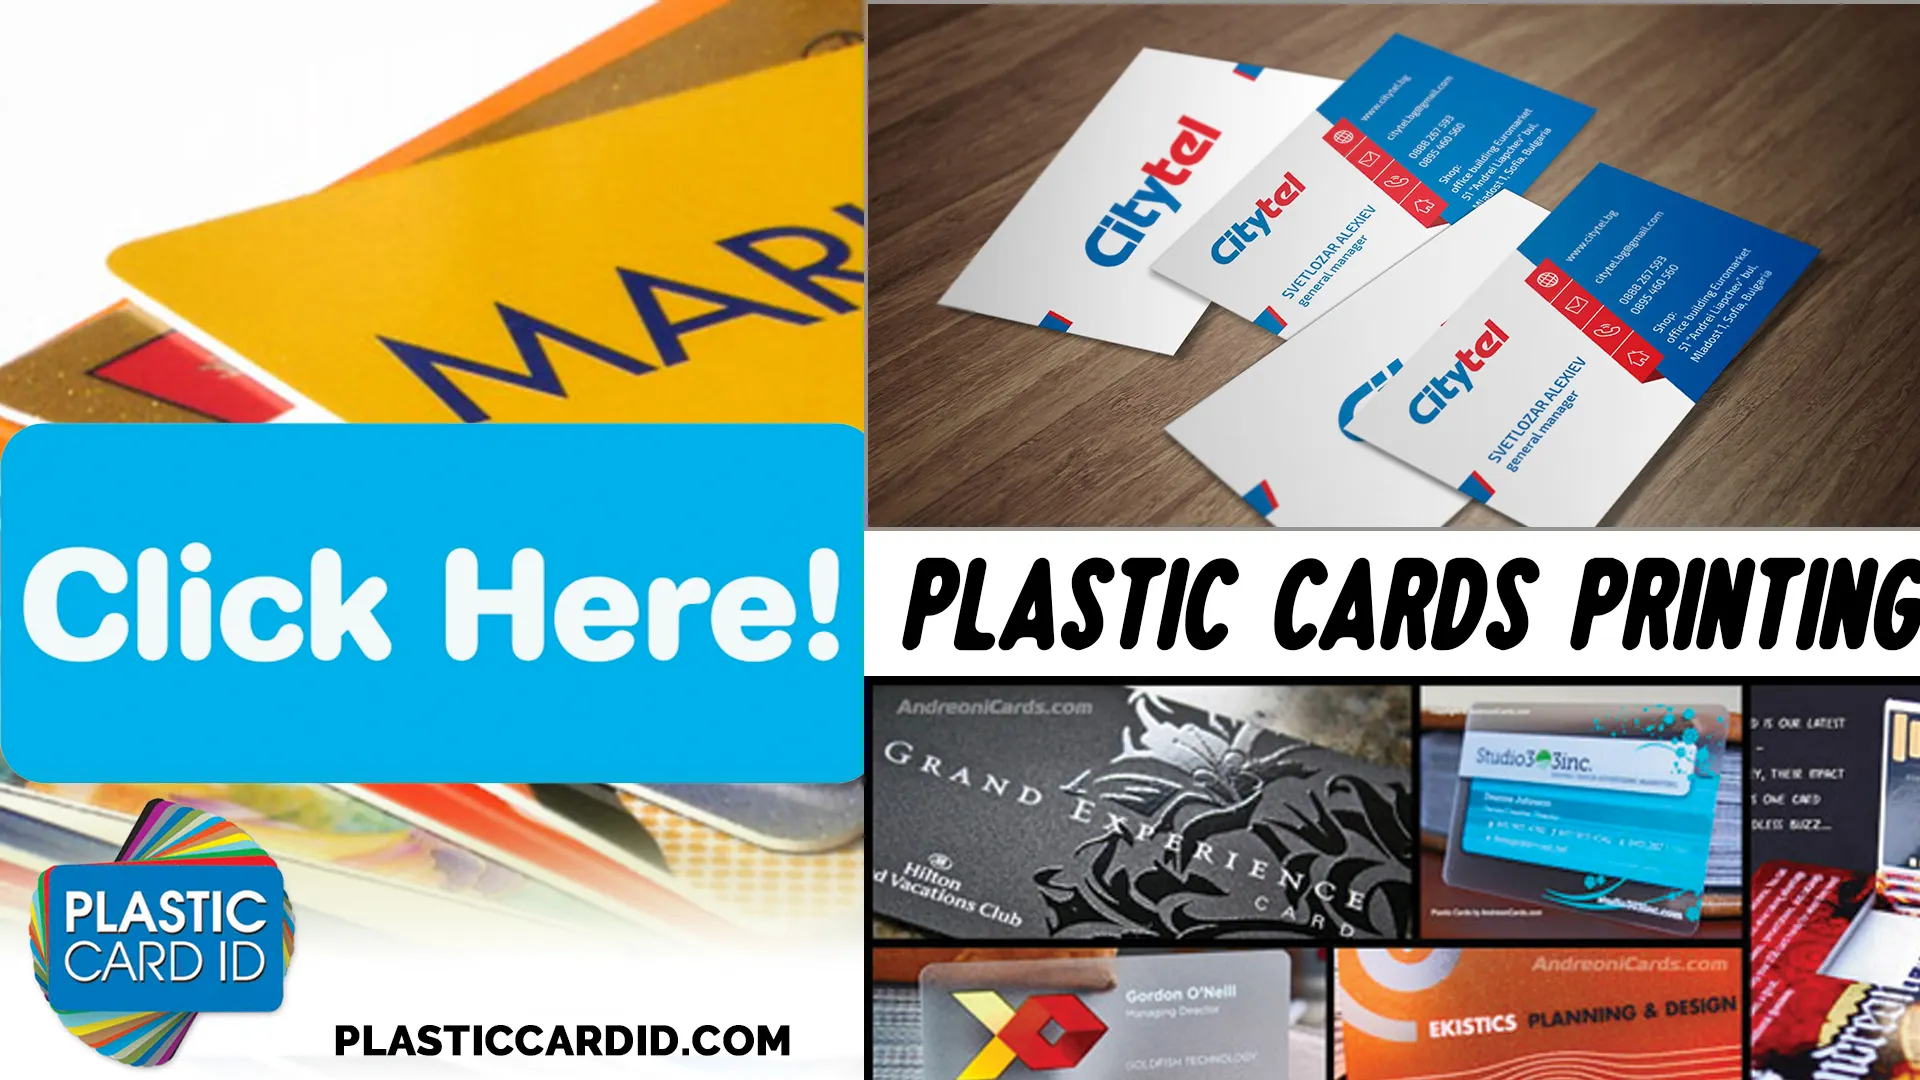 Our Diverse Range of Plastic Cards